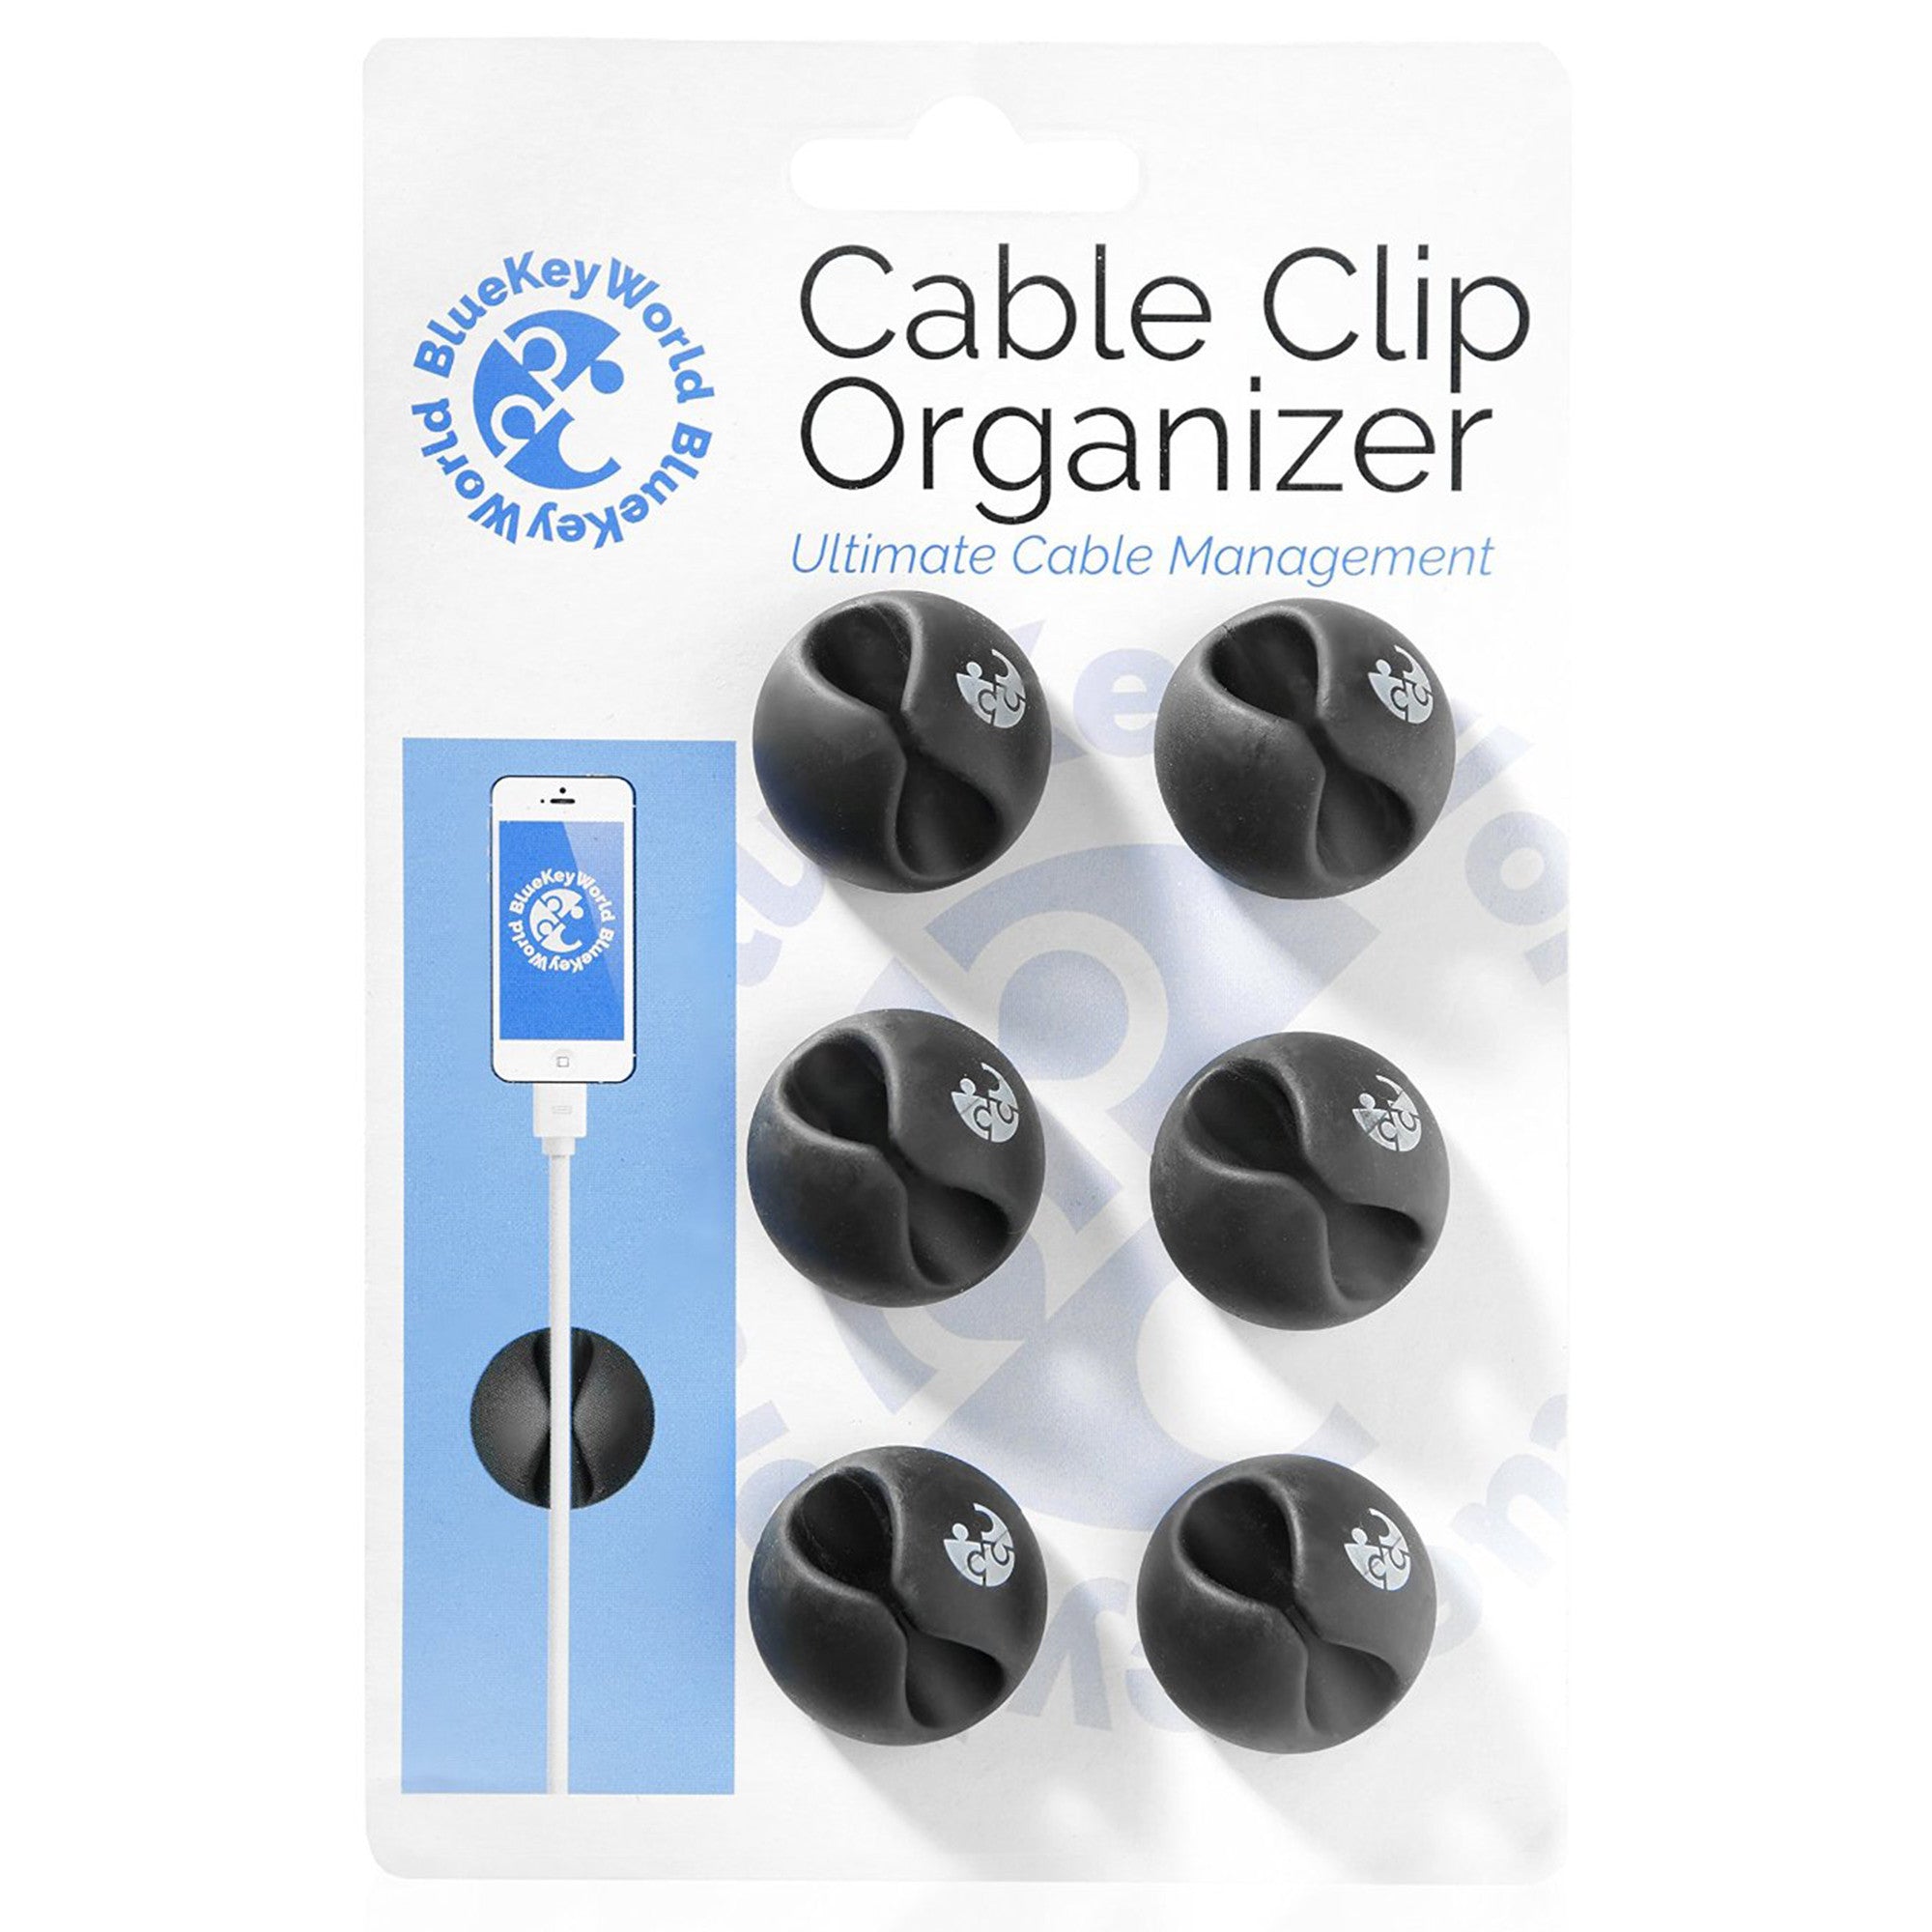 Cable Sleeve, Cable Cover, Wire and Cord Hider - Set of 8 - Computer, –  Blue Key World